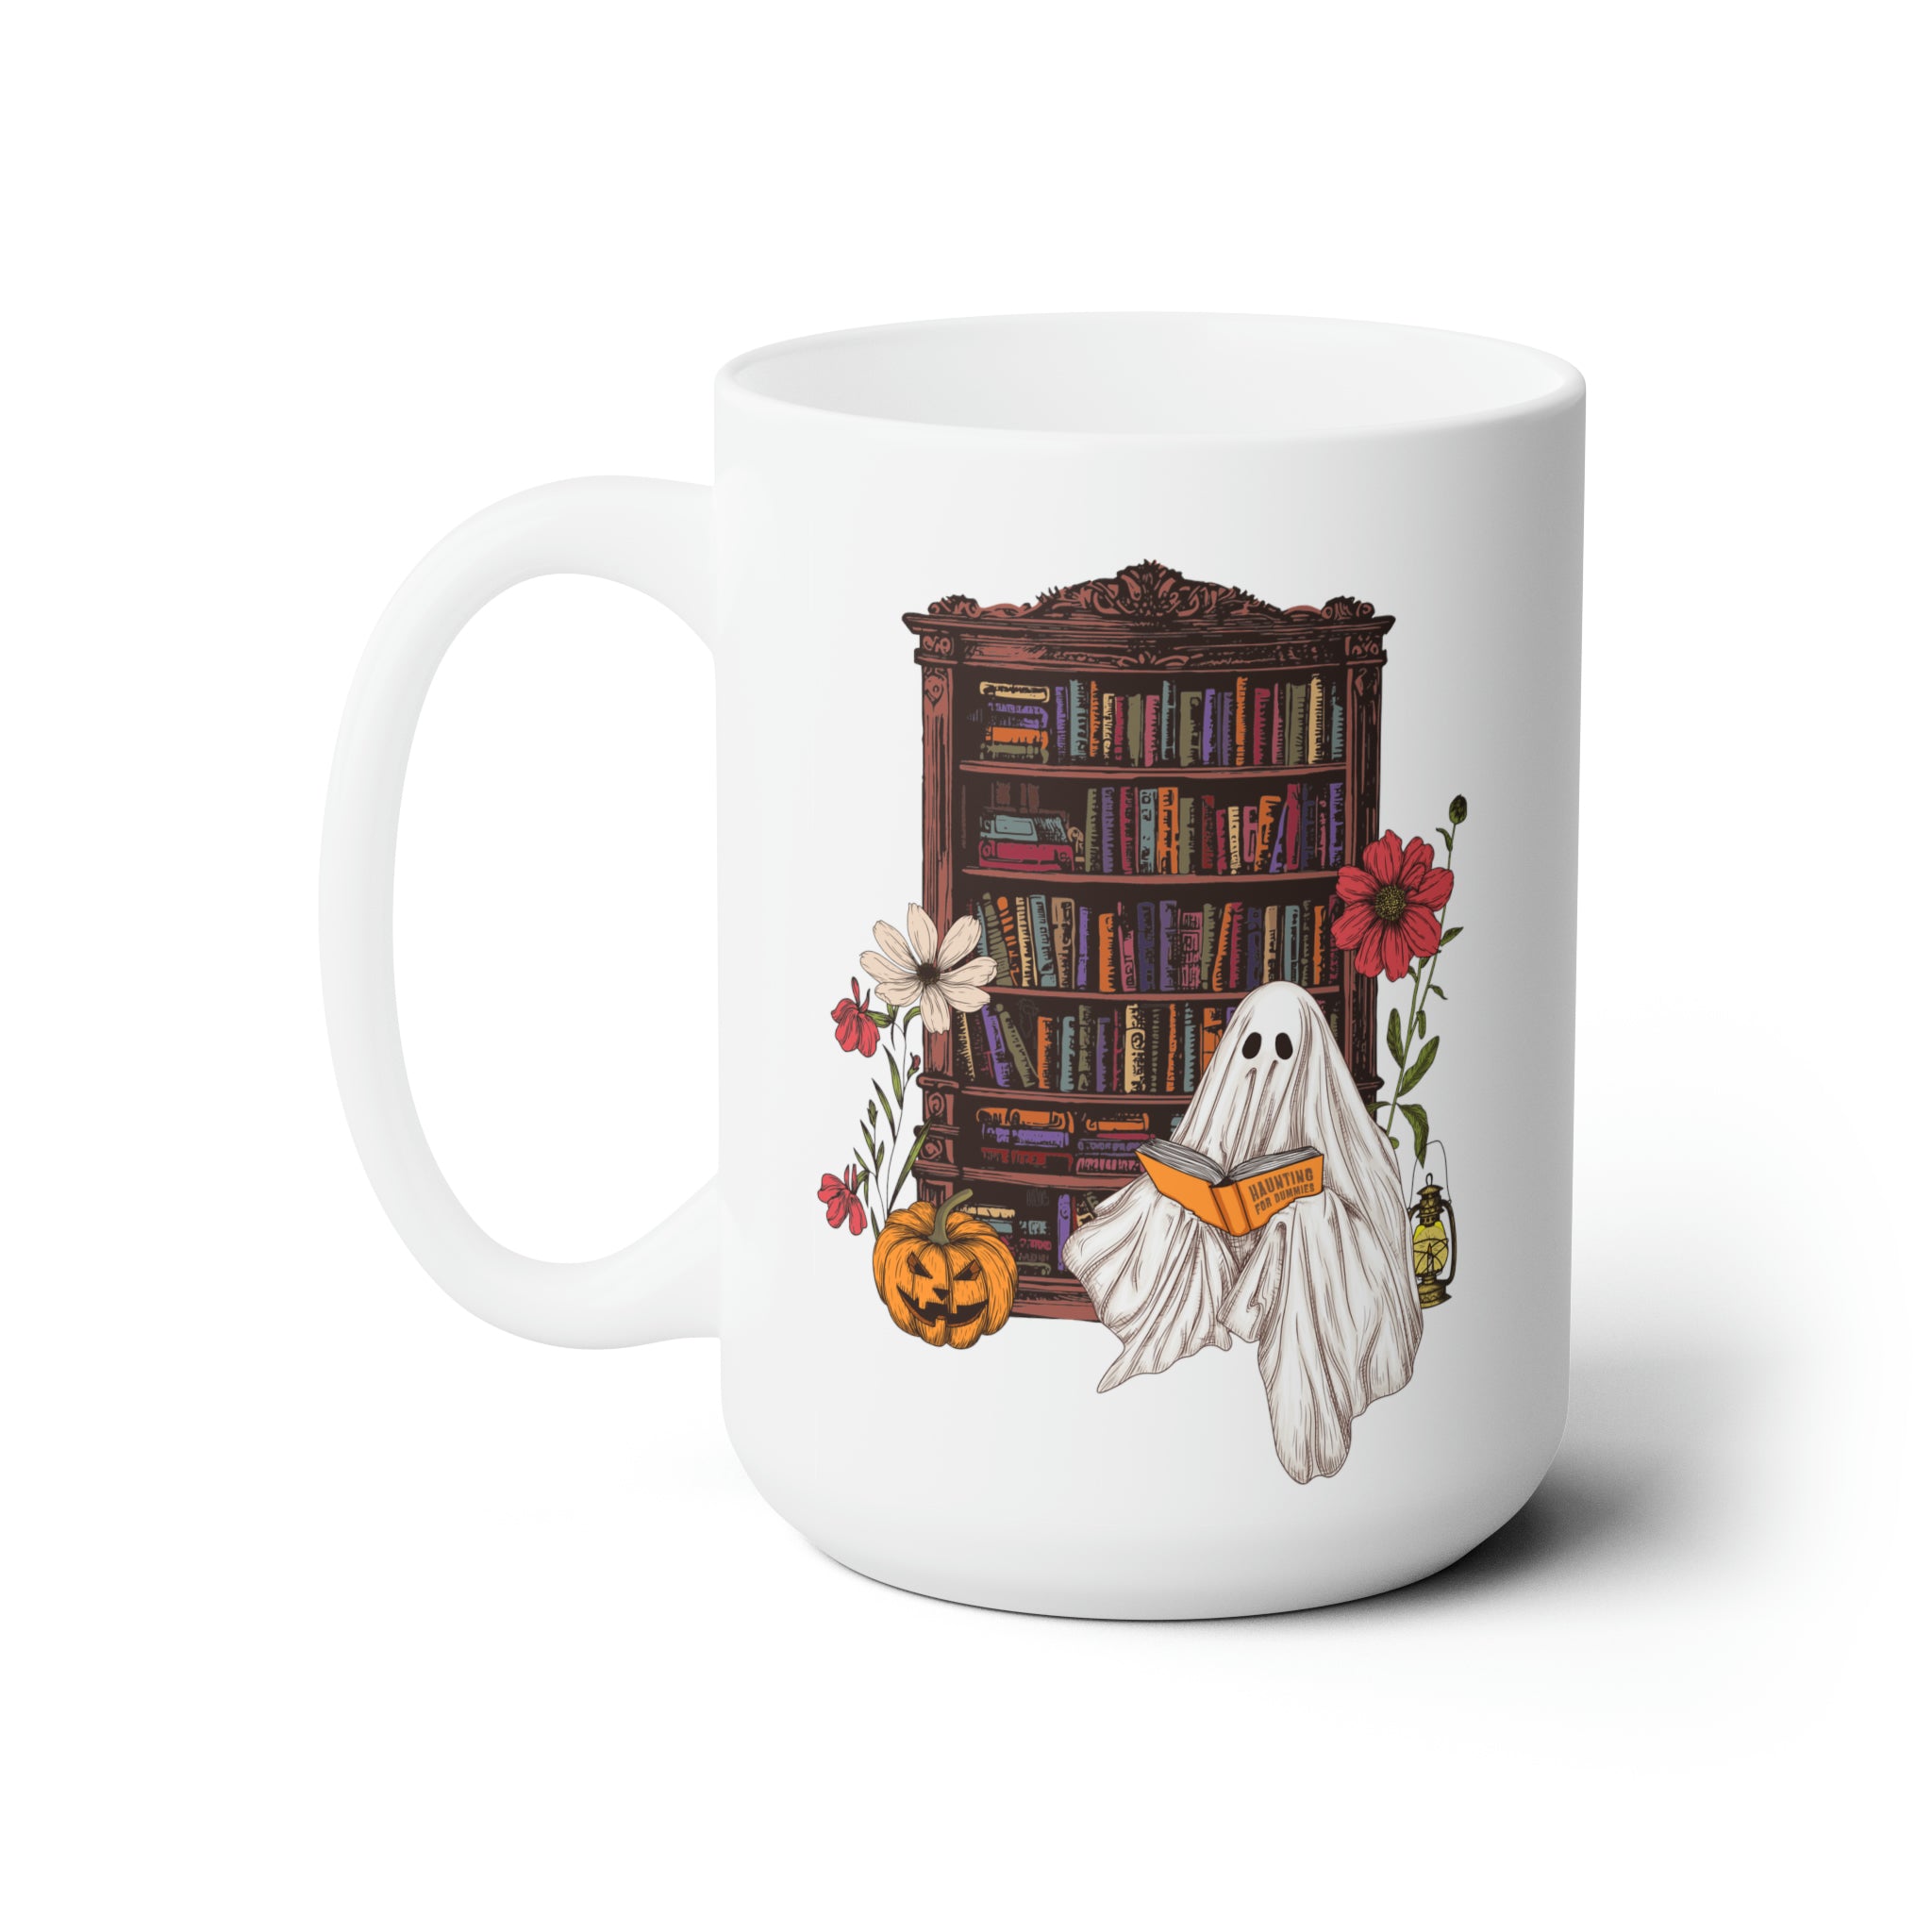 Haunting For Dummies: Ghost Reading A Book In A Haunted Library Vintage Illustrated Mug